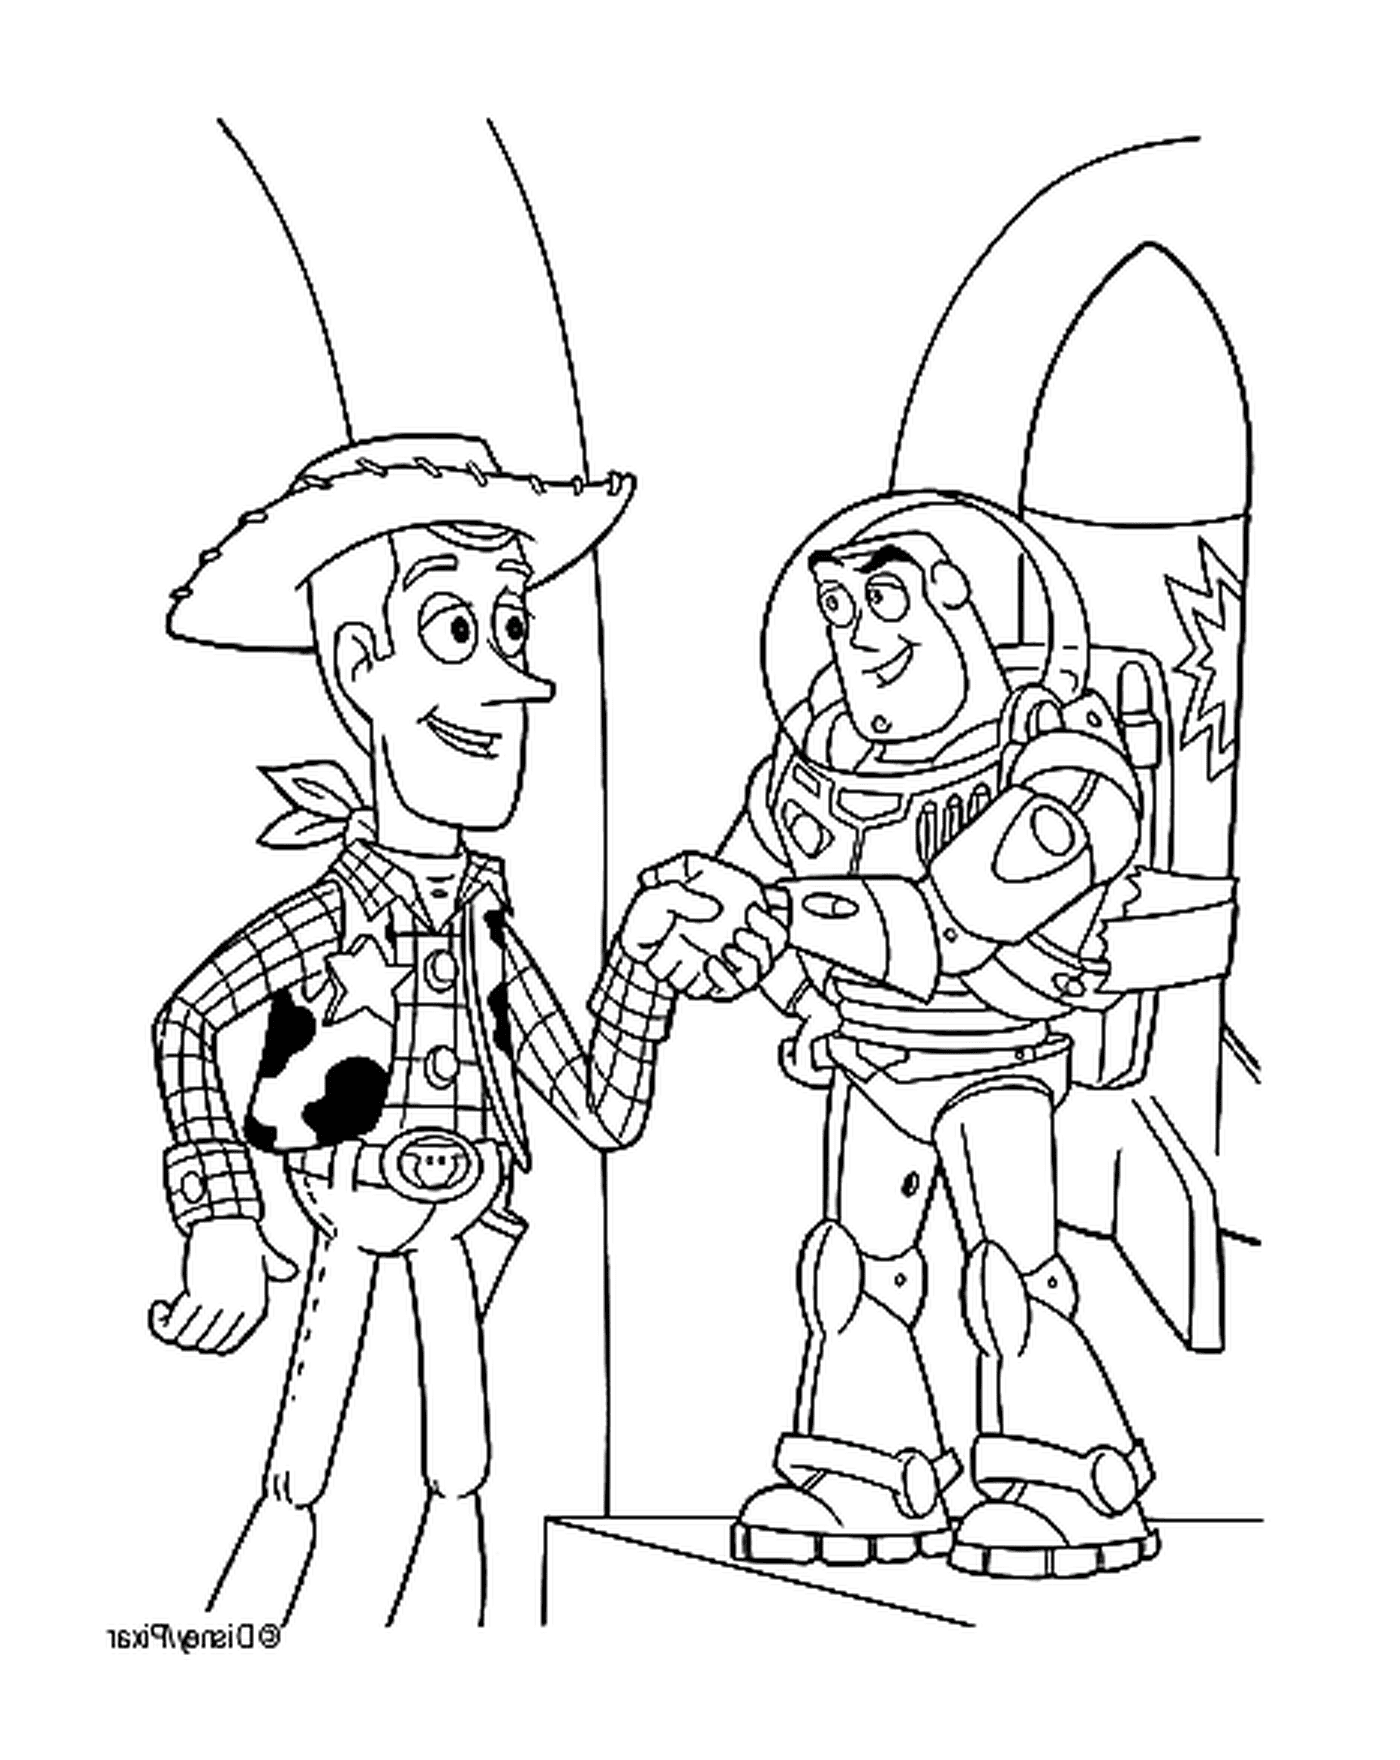  Buzz l'Éclair and Woody, legendary partners 